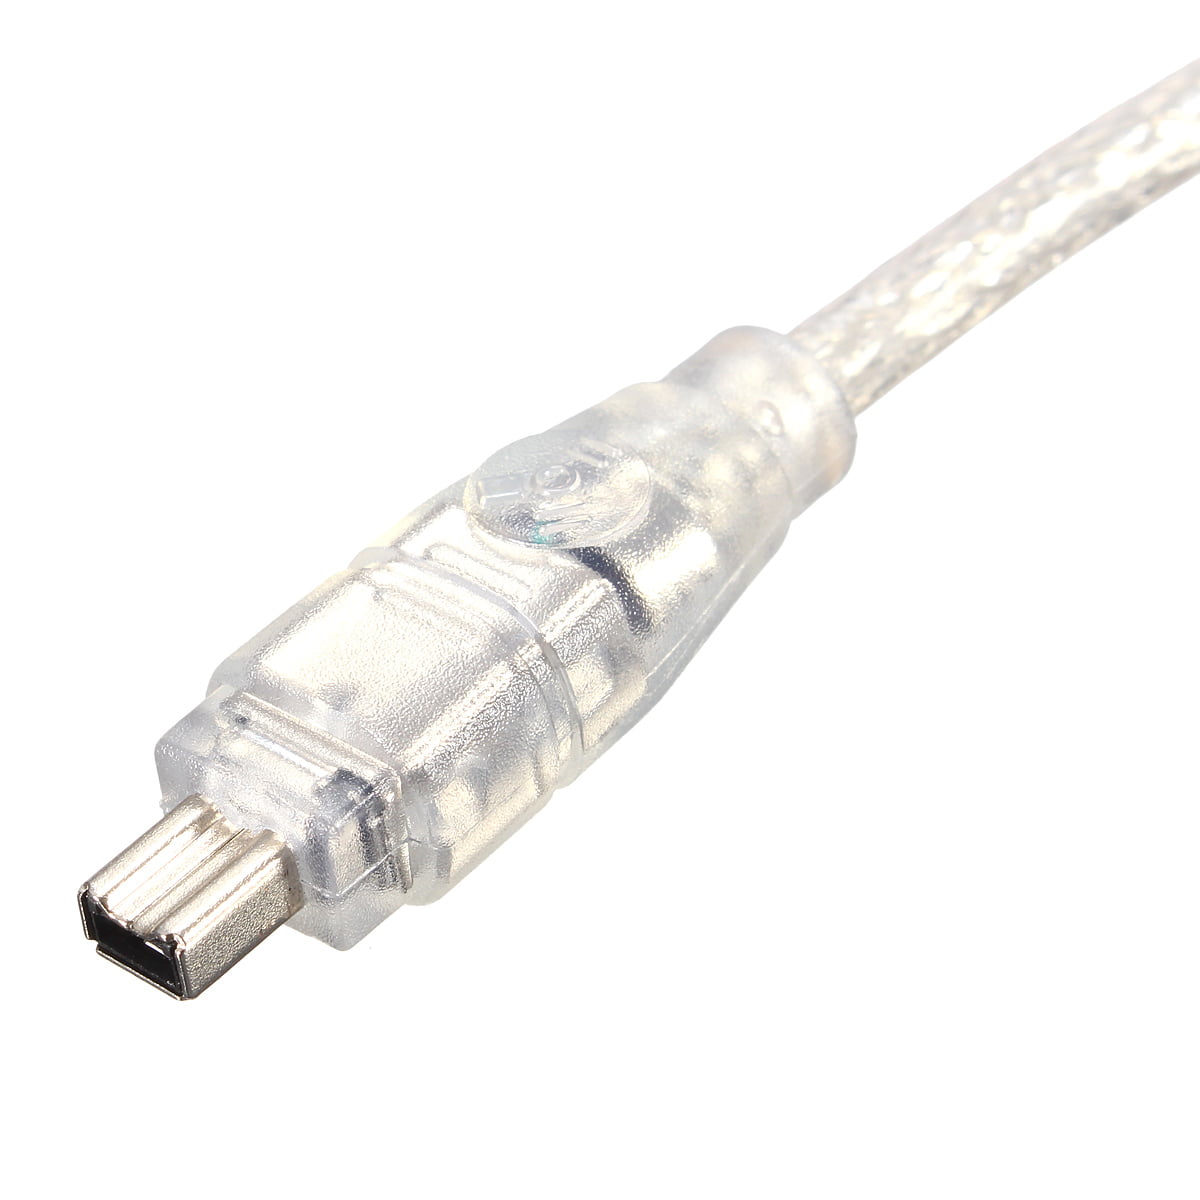 Firewire Cable and Adapter,1.2m USB 2.0 Male to Firewire iEEE 1394 4 Pin Male iLink Adapter Cable 